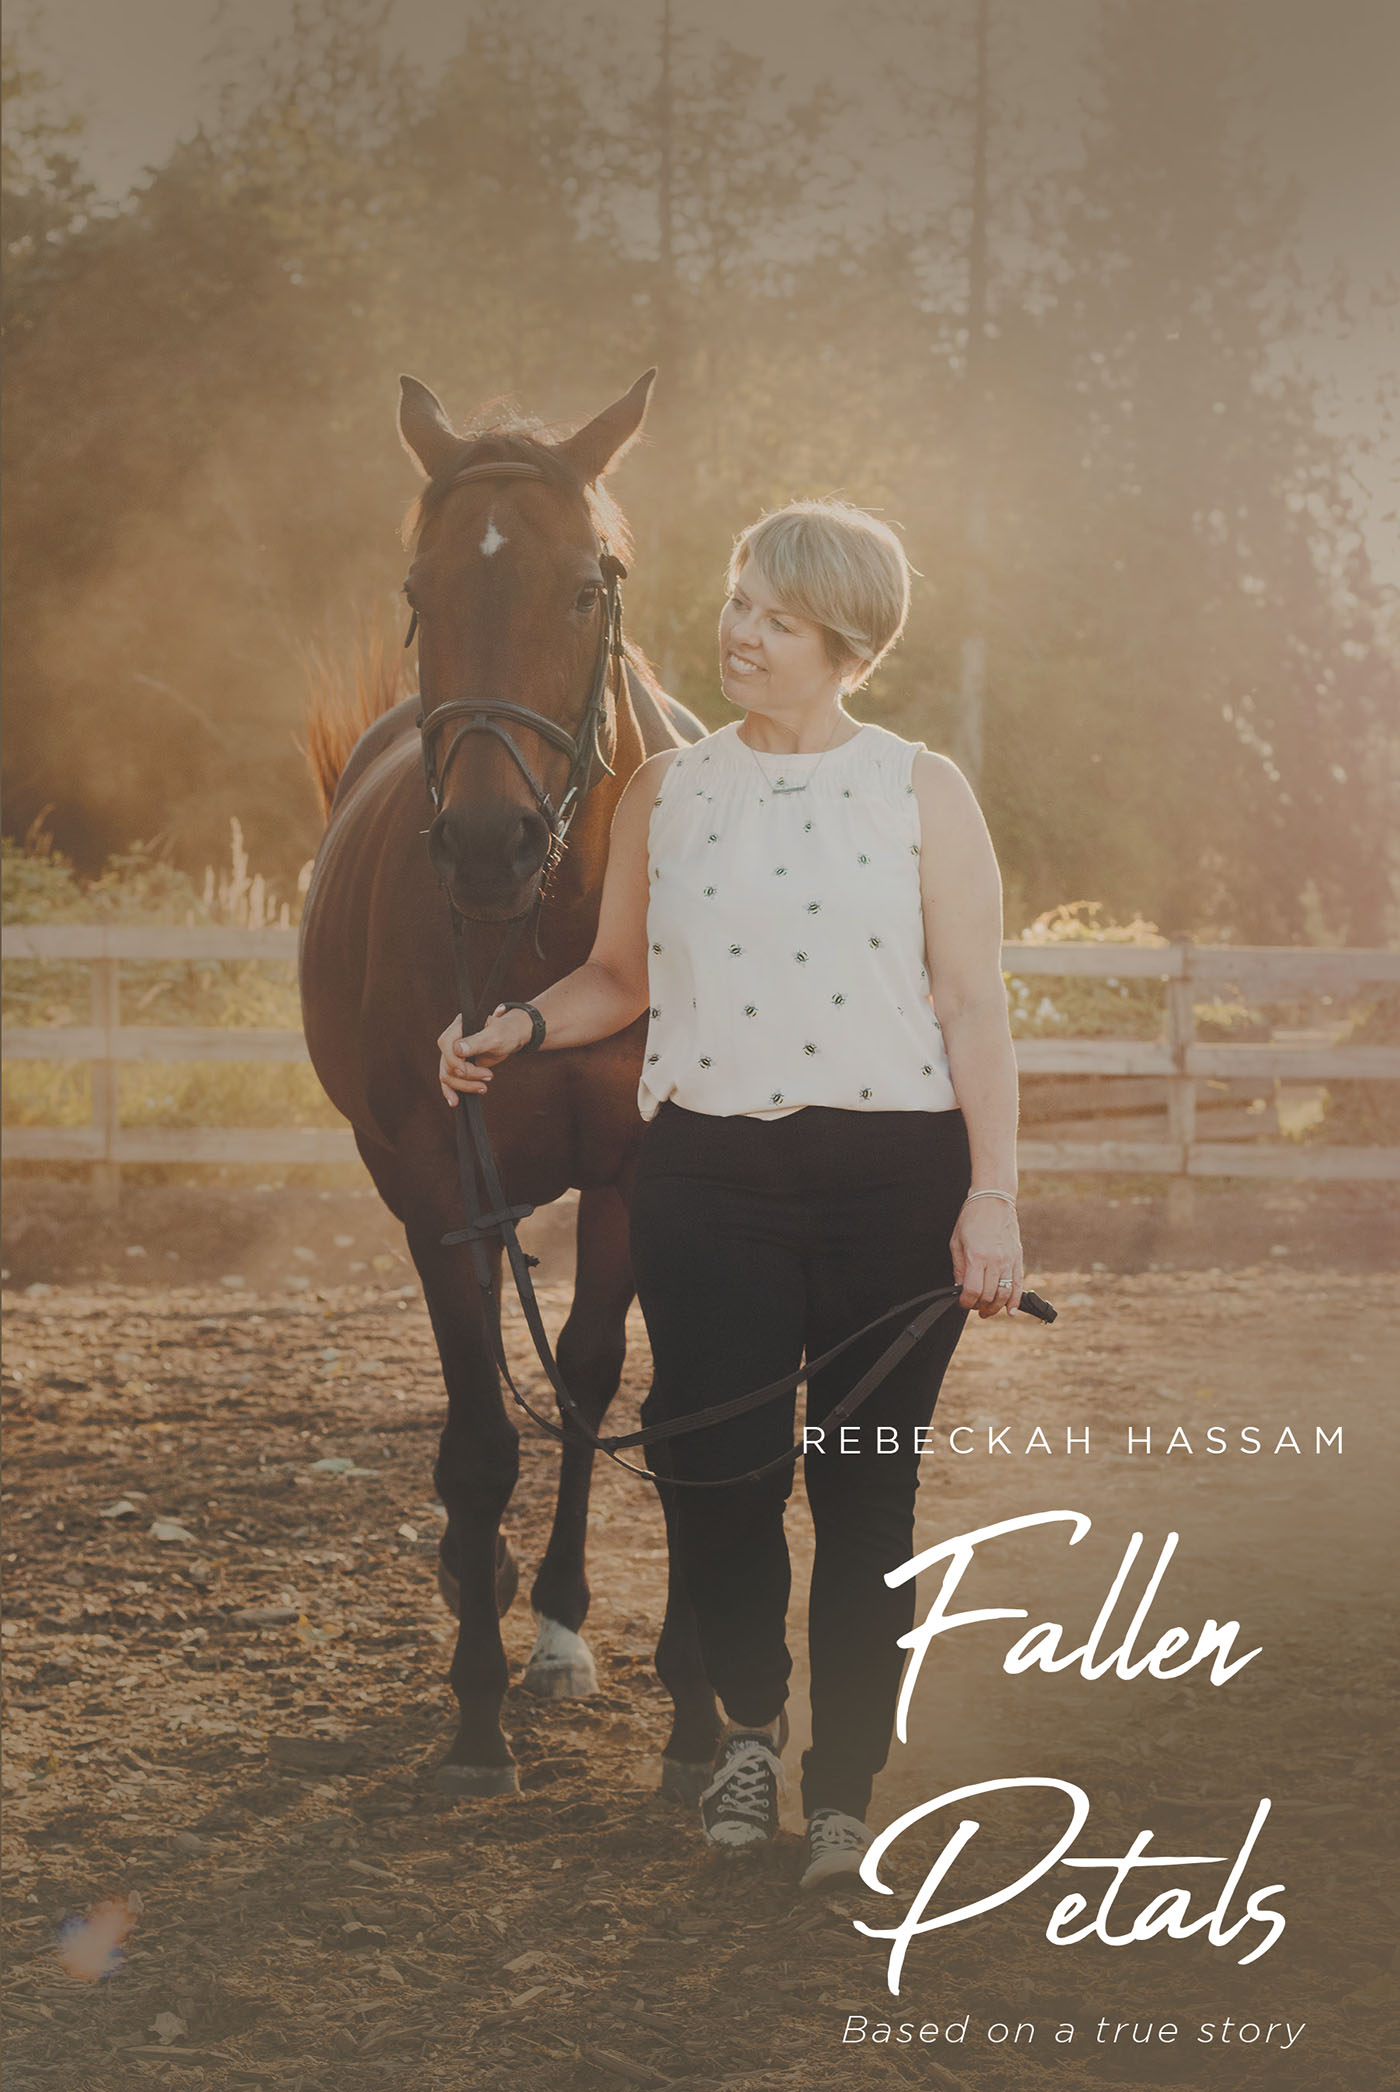 Rebeckah Hassam’s New Book, "Fallen Petals," is One Woman’s Inspirational Journey to Reclaim Her Life After Escaping a Dismal Childhood Filled with Abuse